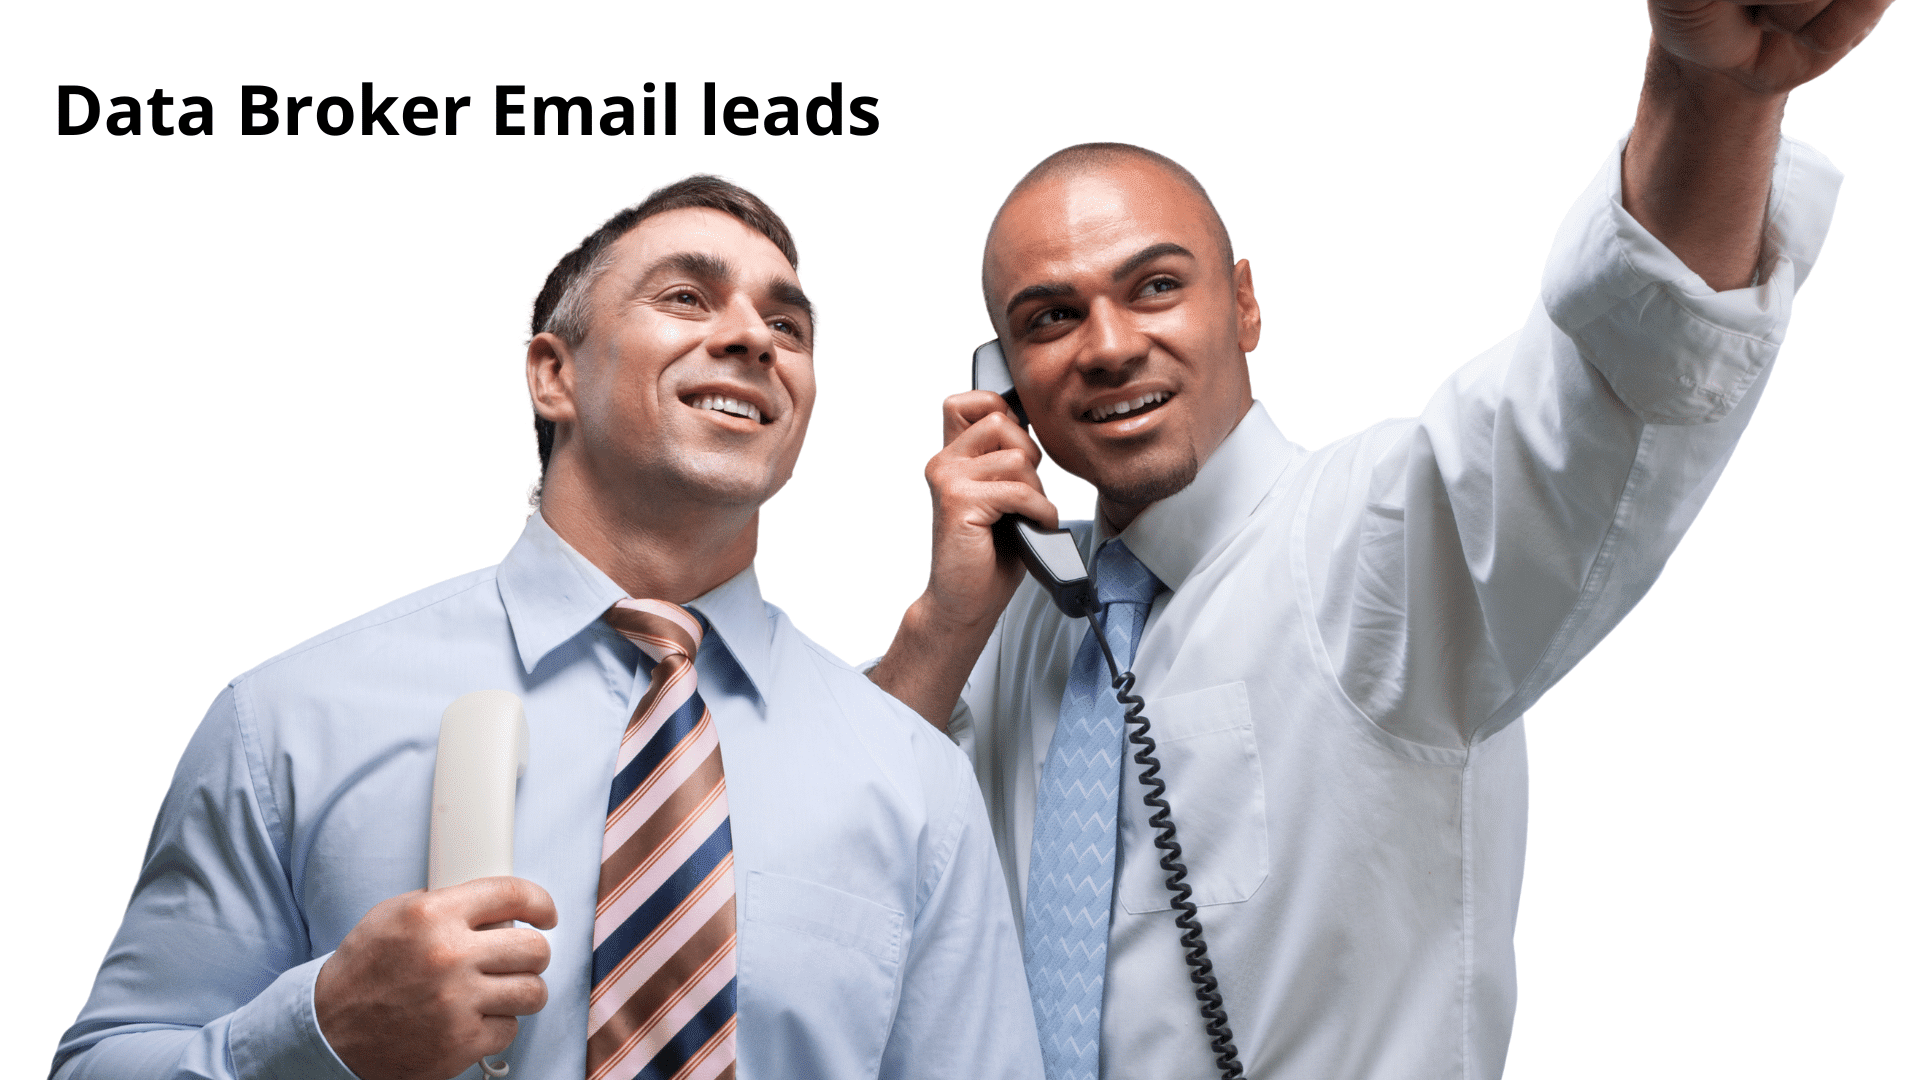 Data Broker Email leads